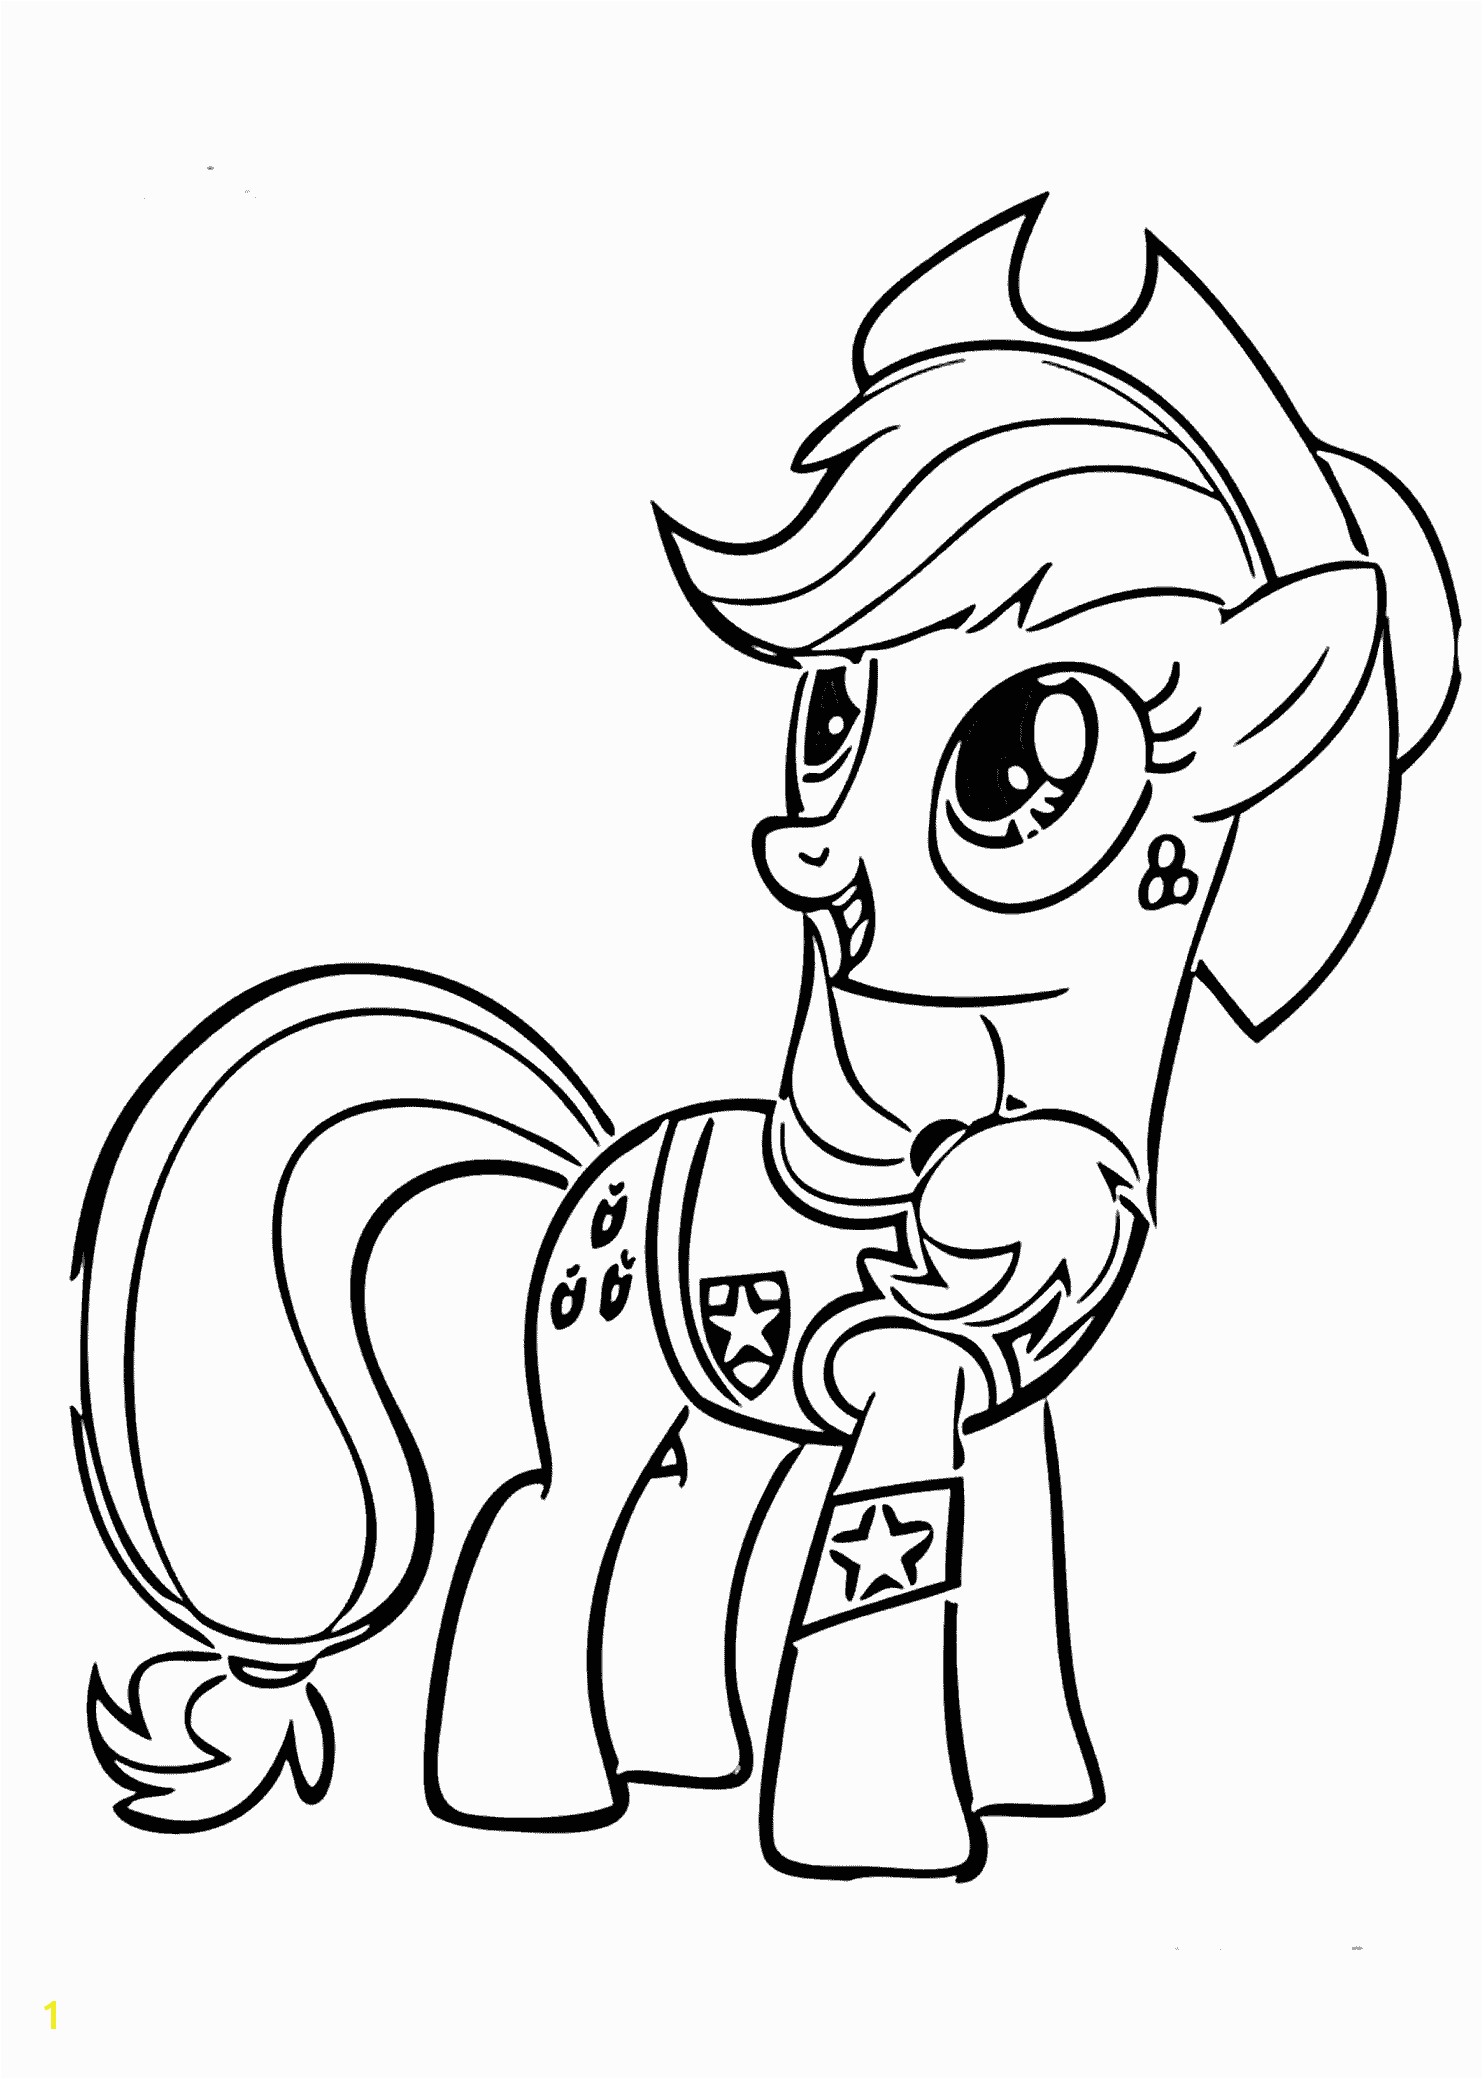 My Little Pony Color Pages Best Little Pony Coloring Pages Coloring Pages